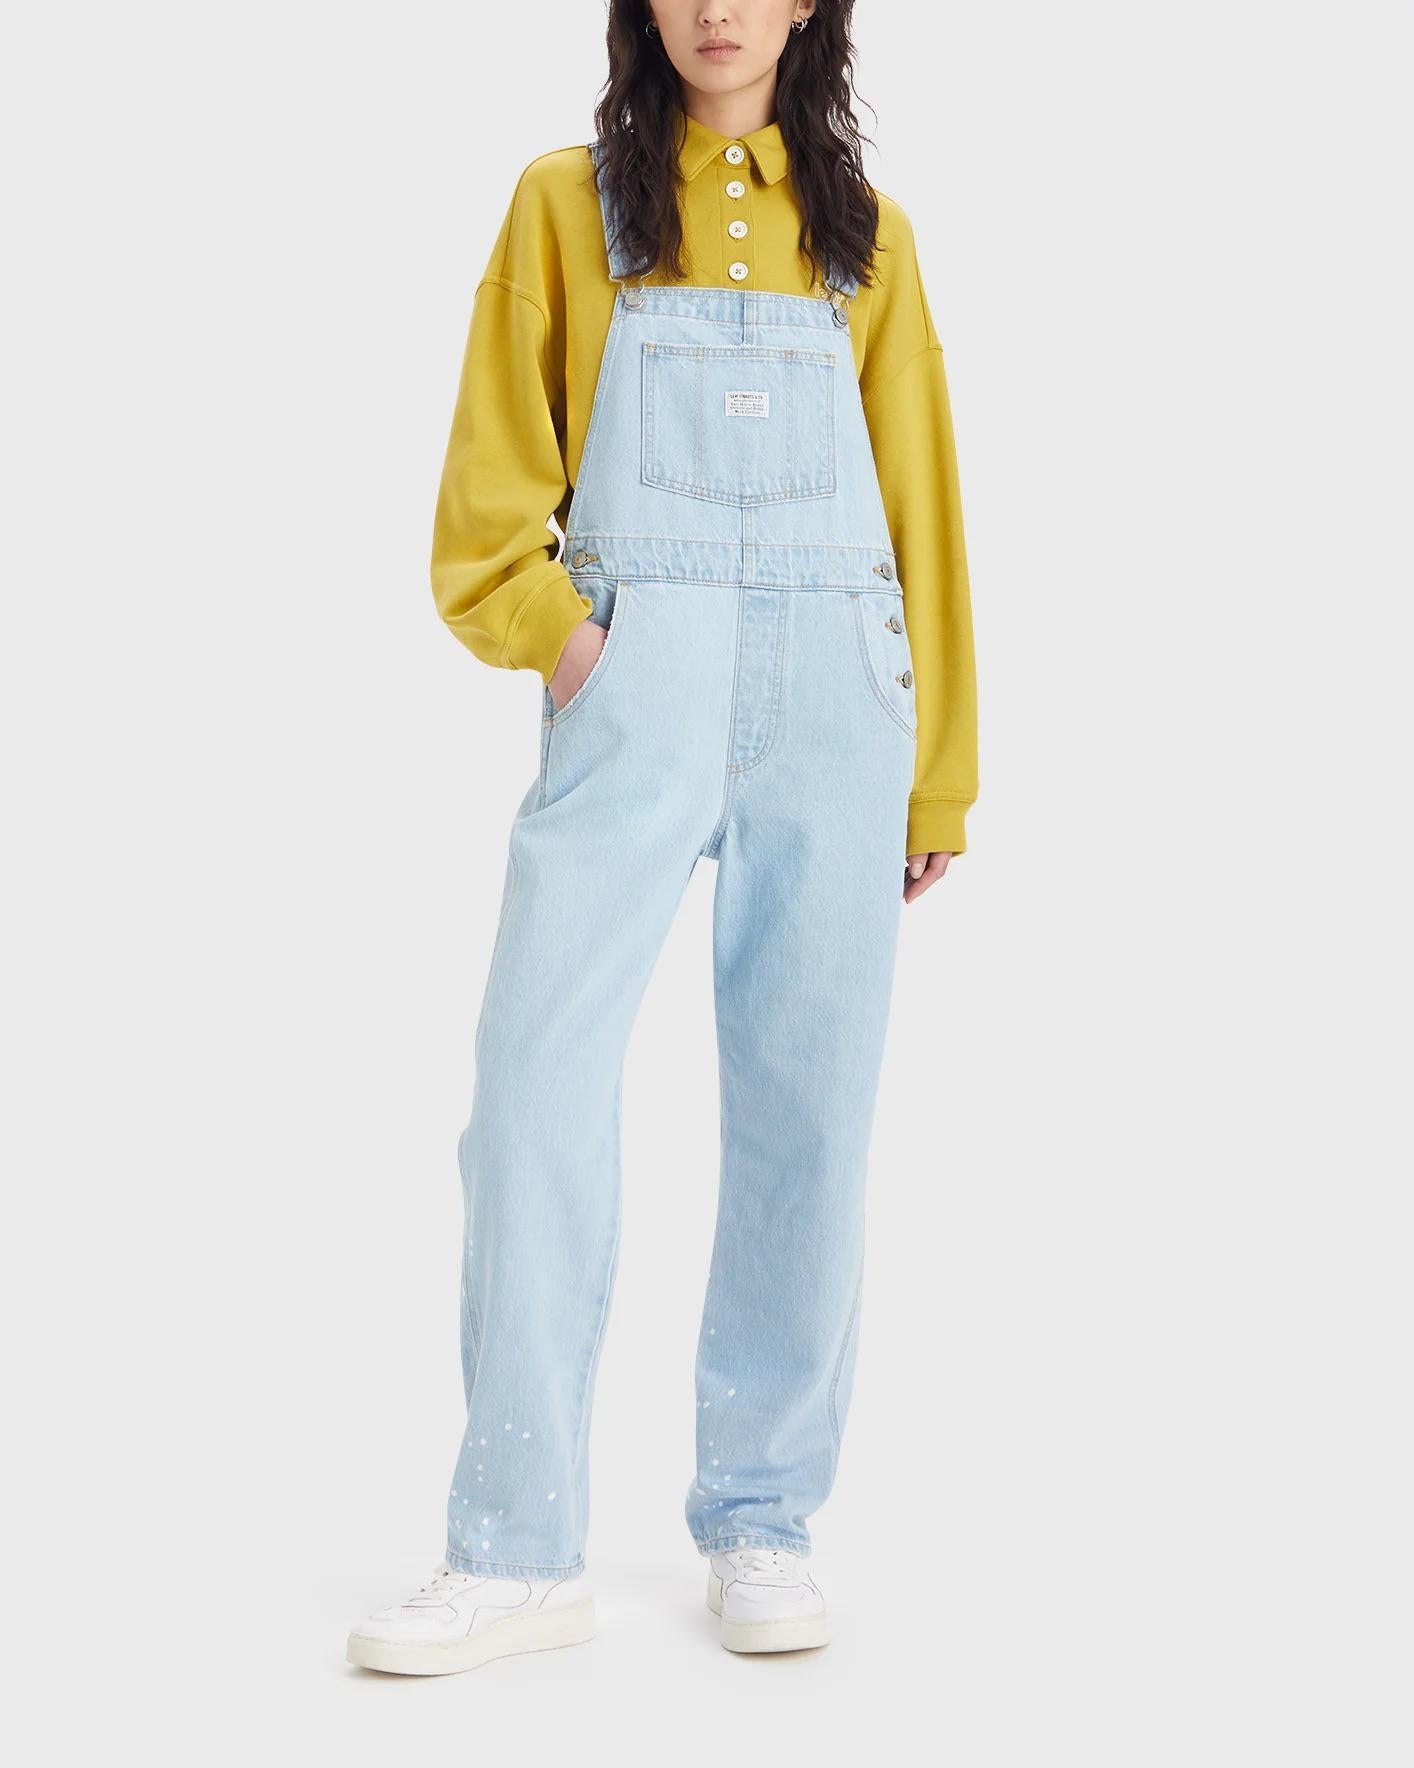 Levi's Ladies Vintage Overall In Light Blue 853150020